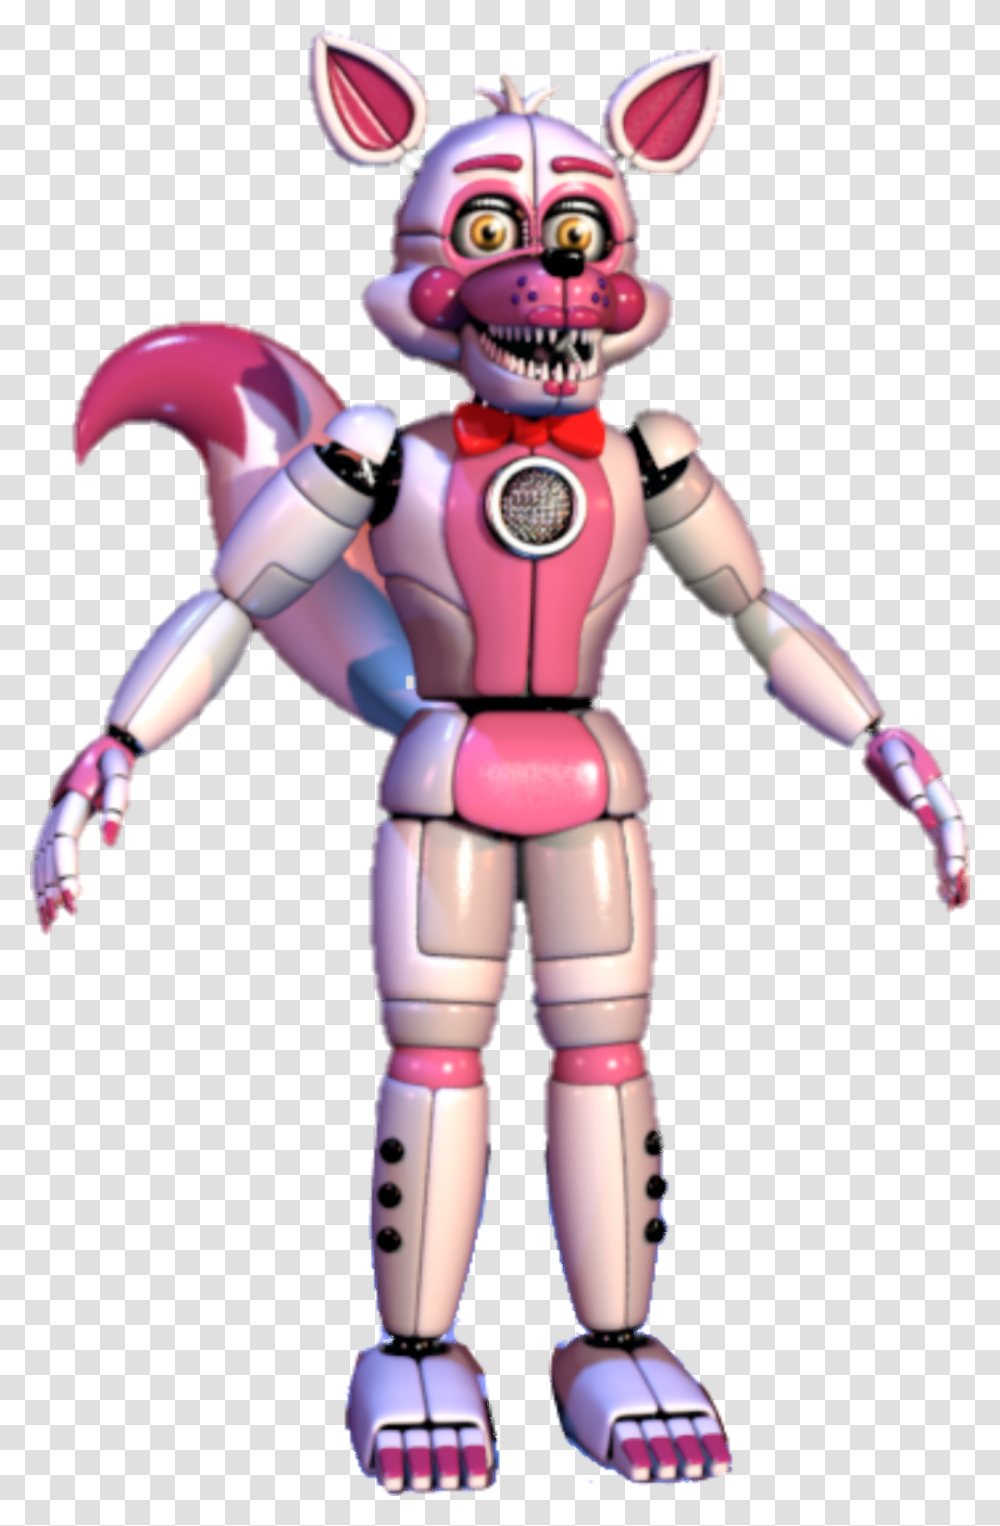 Funtime Foxy Full Body By Thatfnafgamer Ballora And Funtime Foxy Transparent Png